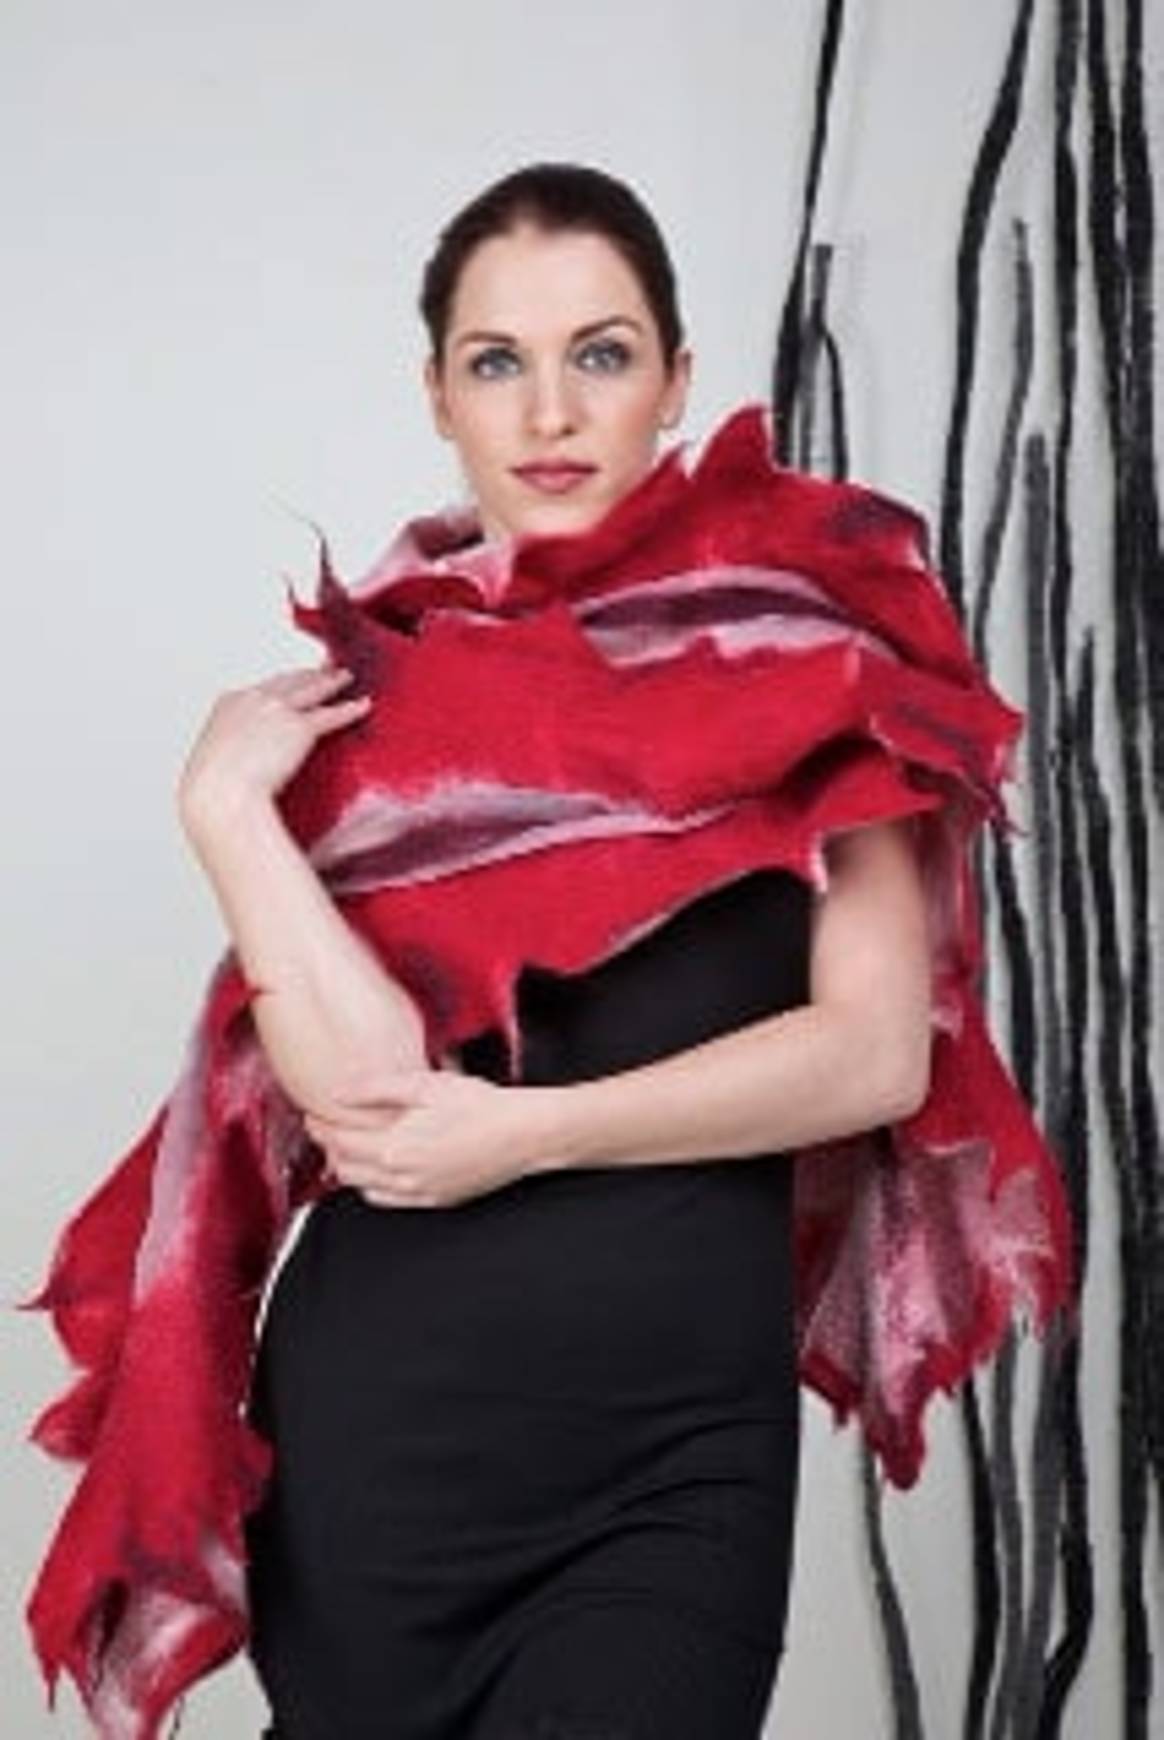 evagodiva presents for the first time her sustainable collection in New York - Moda Manhattan!